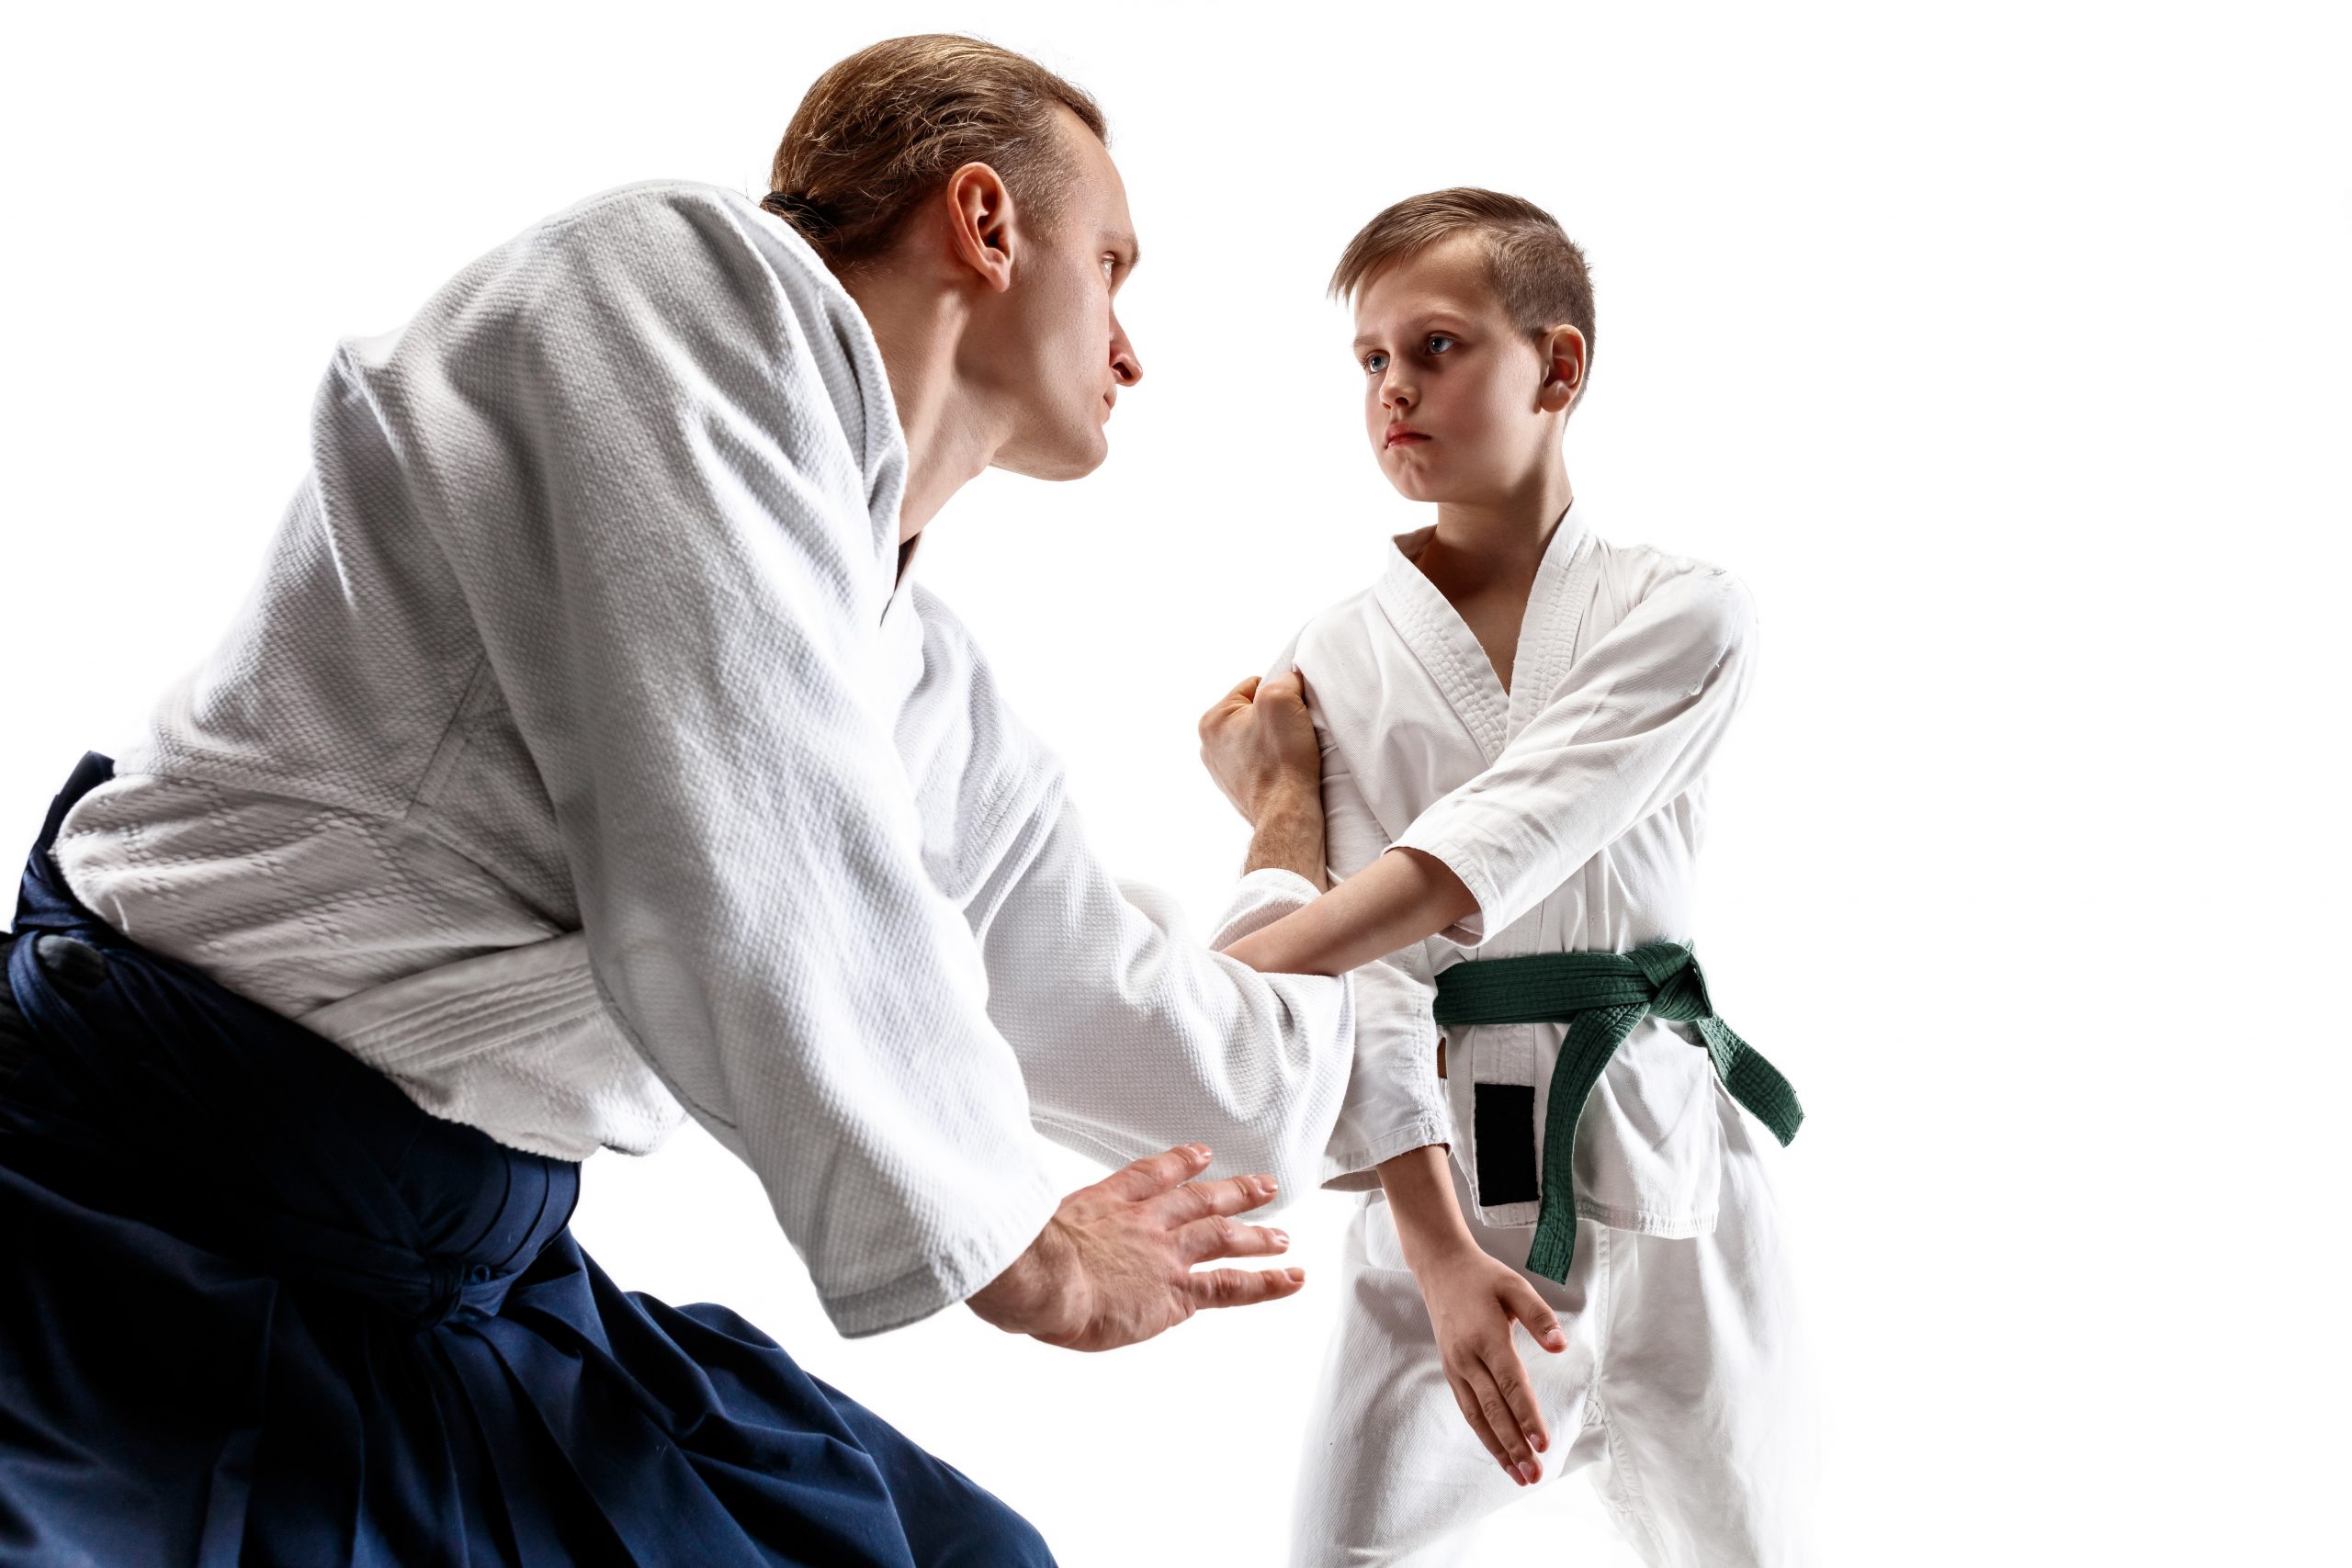 What is the best age to learn self defense?